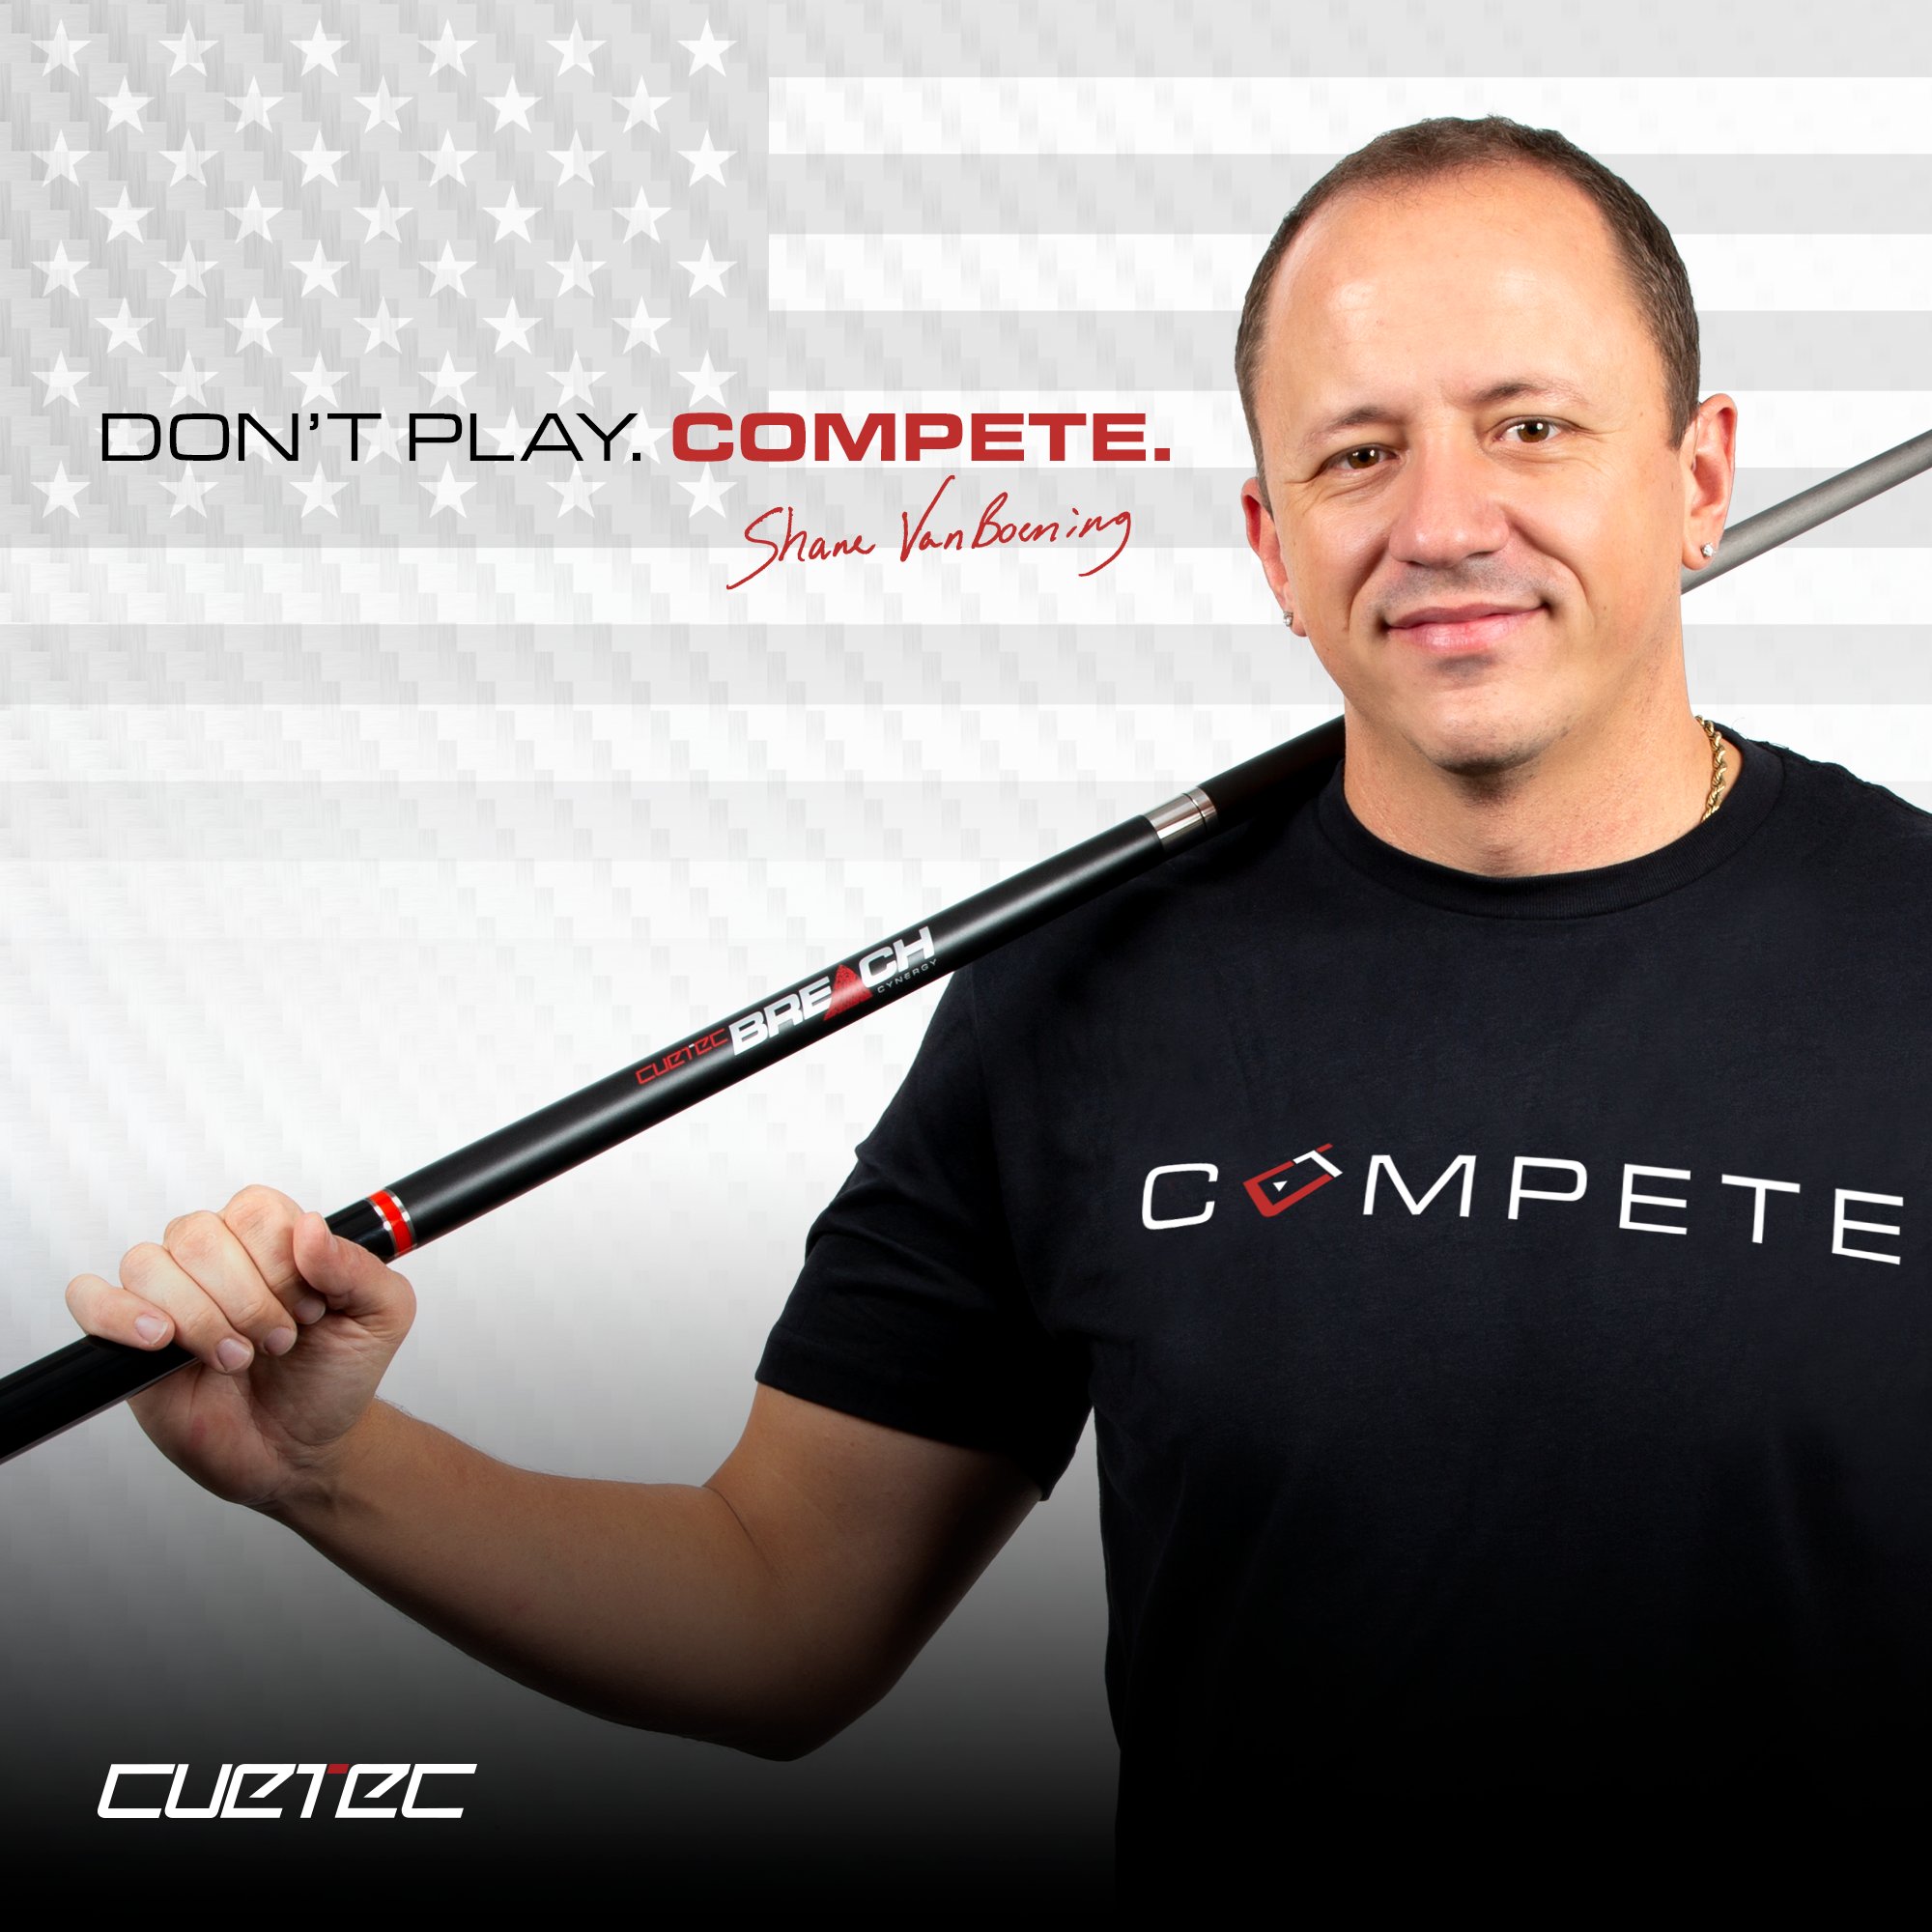 bytte rundt Bror Træts webspindel Cuetec USA on Twitter: "Like this post and join us in wishing Cuetec Pro  Shane Van Boening the best of luck as he prepares to fight for another  Mosconi Cup! Go get '